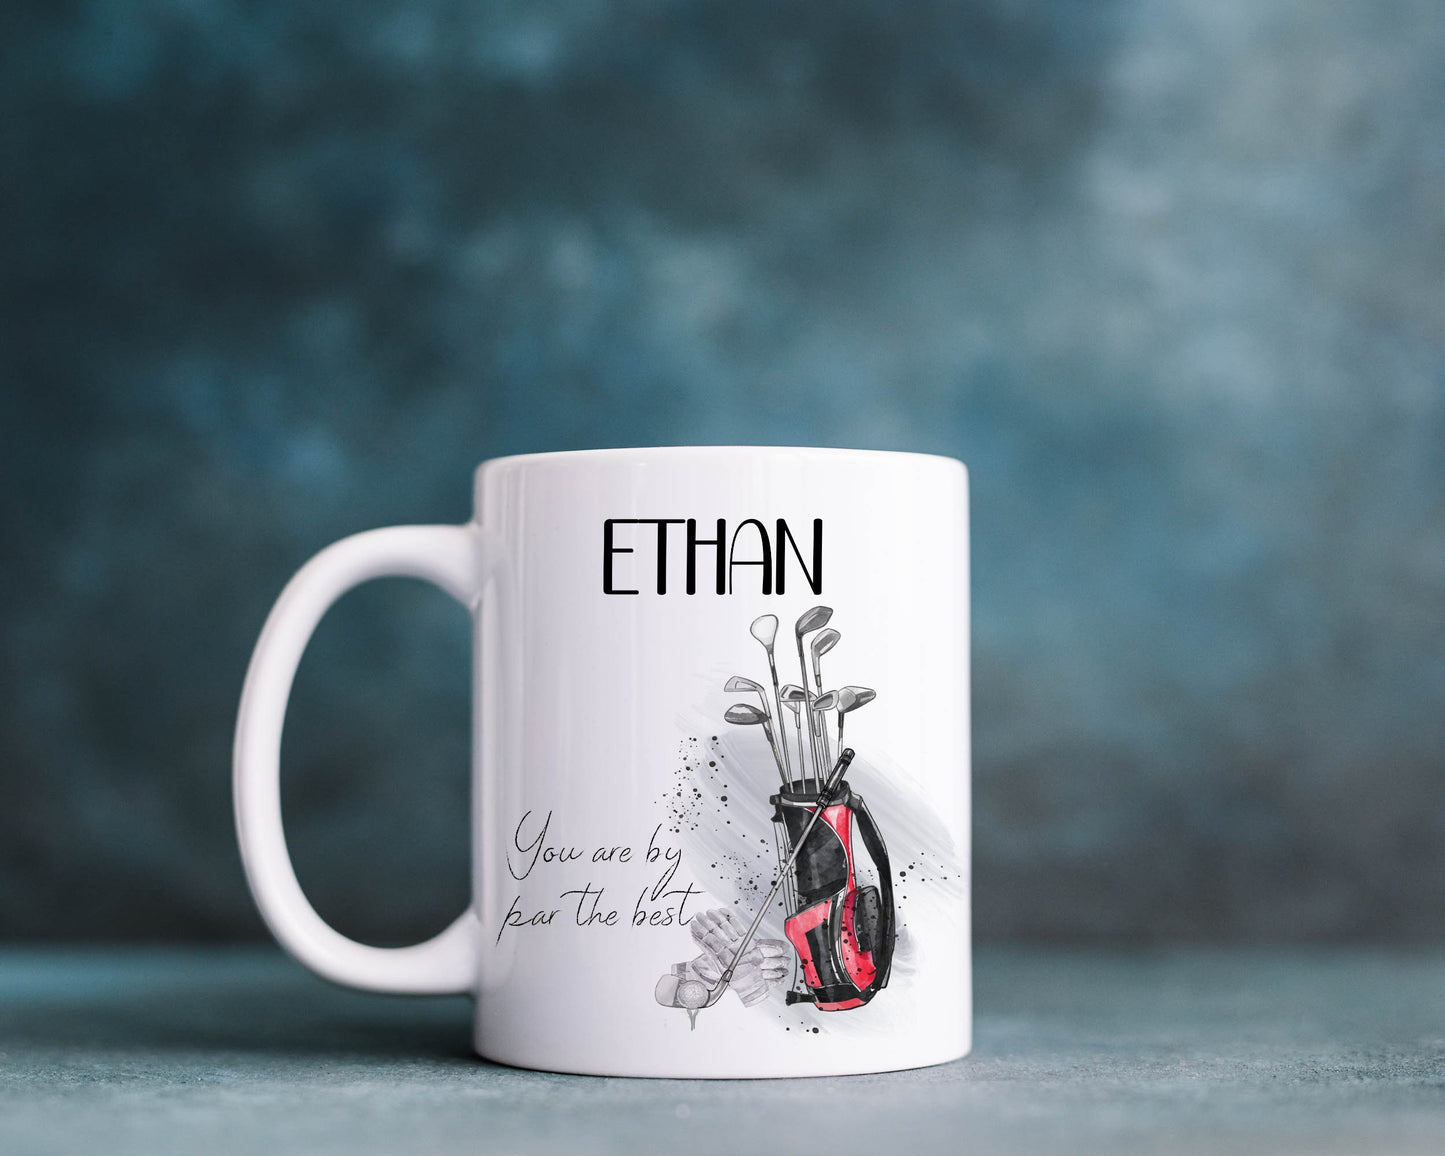 Ceramic mug with a watercolour golf bag and clubs design, the text reads 'You are by par the best' Can be personalised